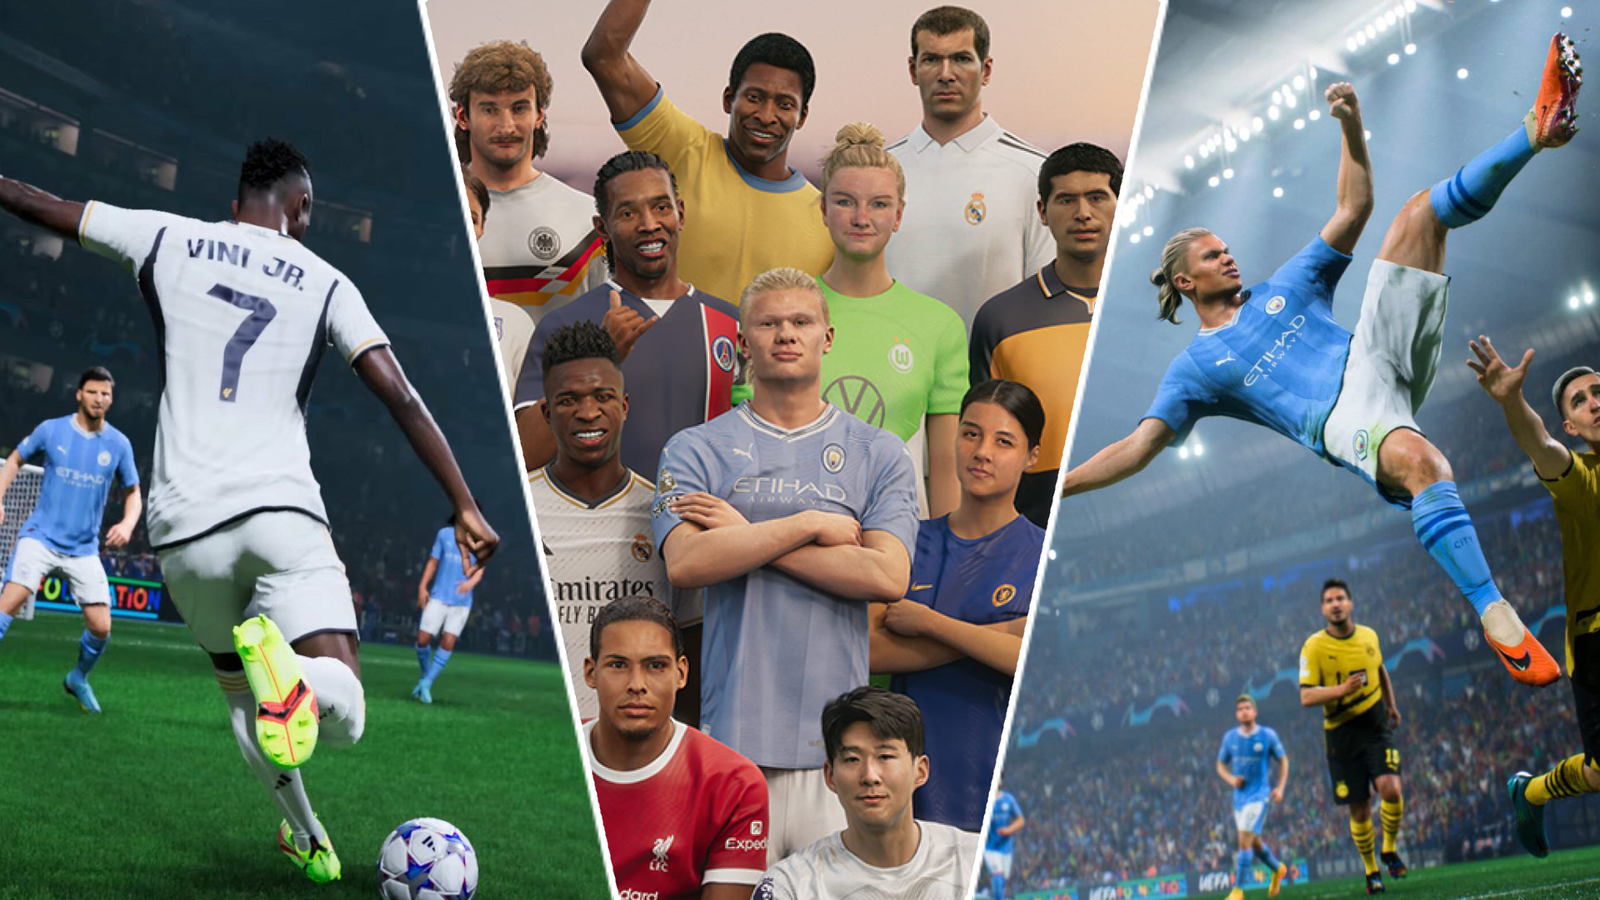 EA FC 24 release time: here's when it goes live on PS5, PS4, Xbox